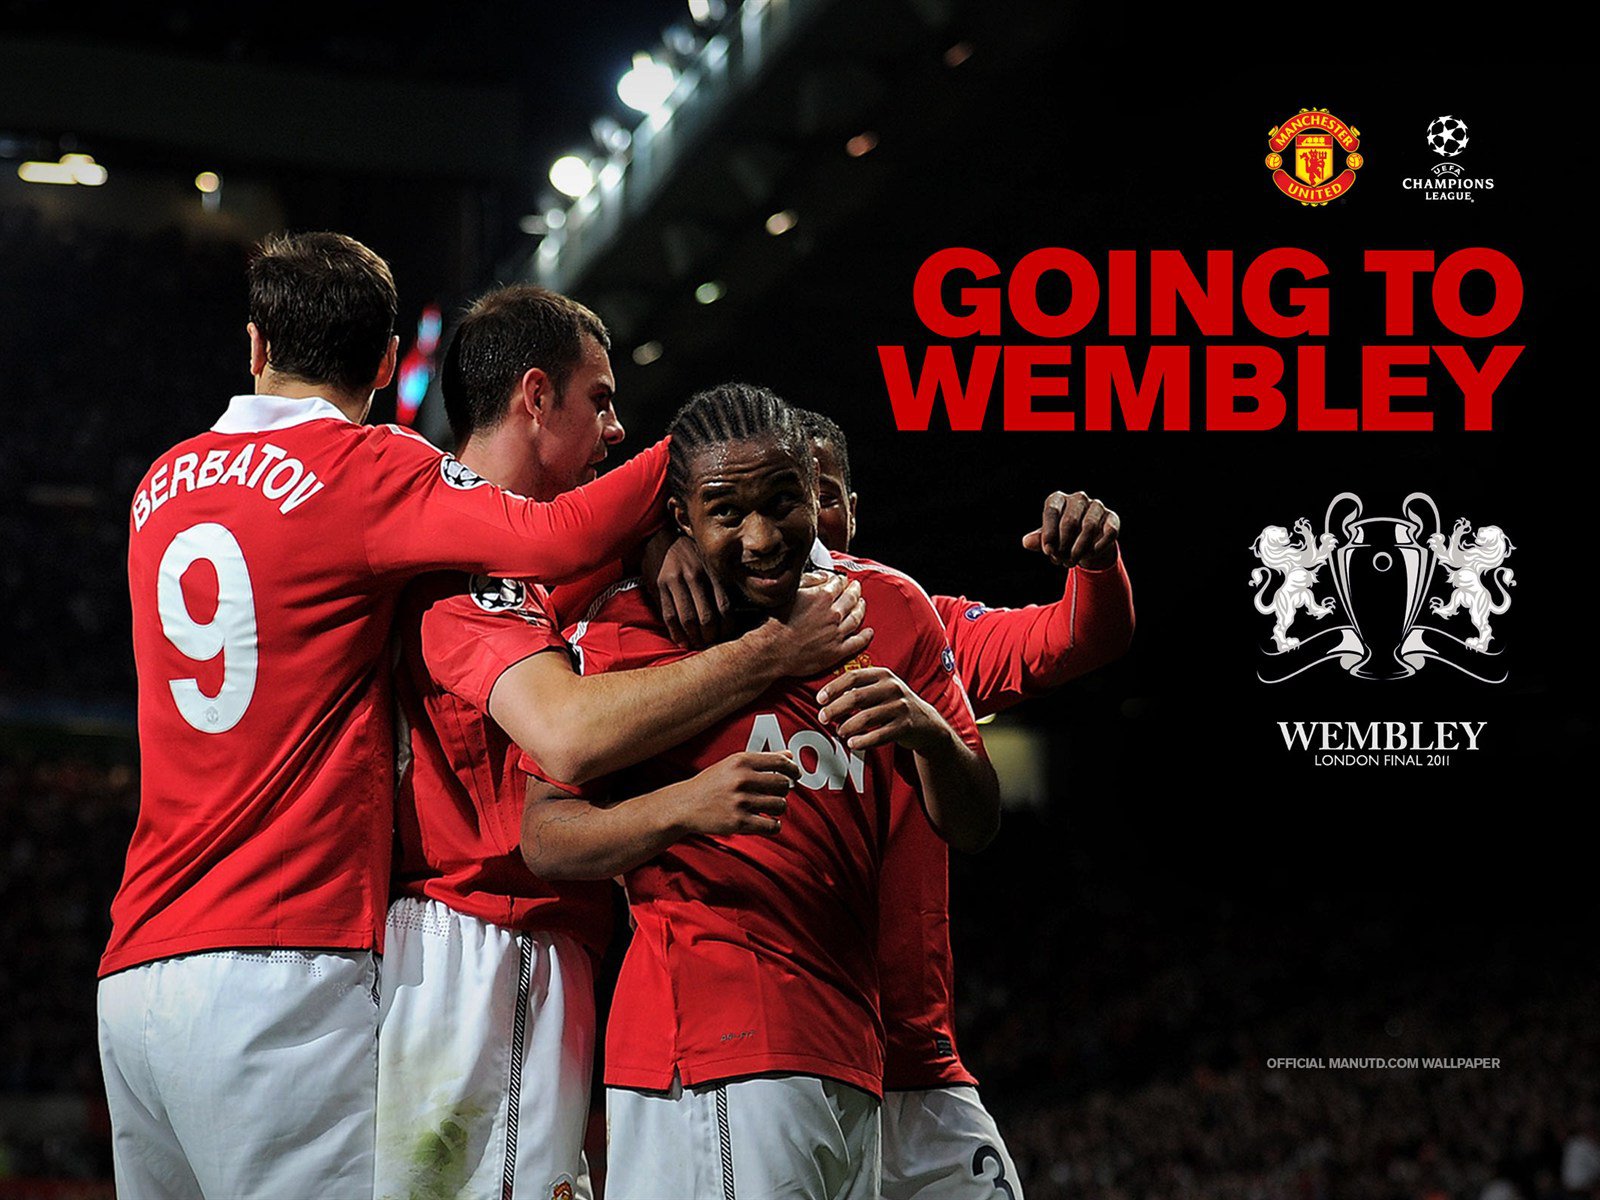 We Re The Famous Man United And Were Going To Wembley - HD Wallpaper 